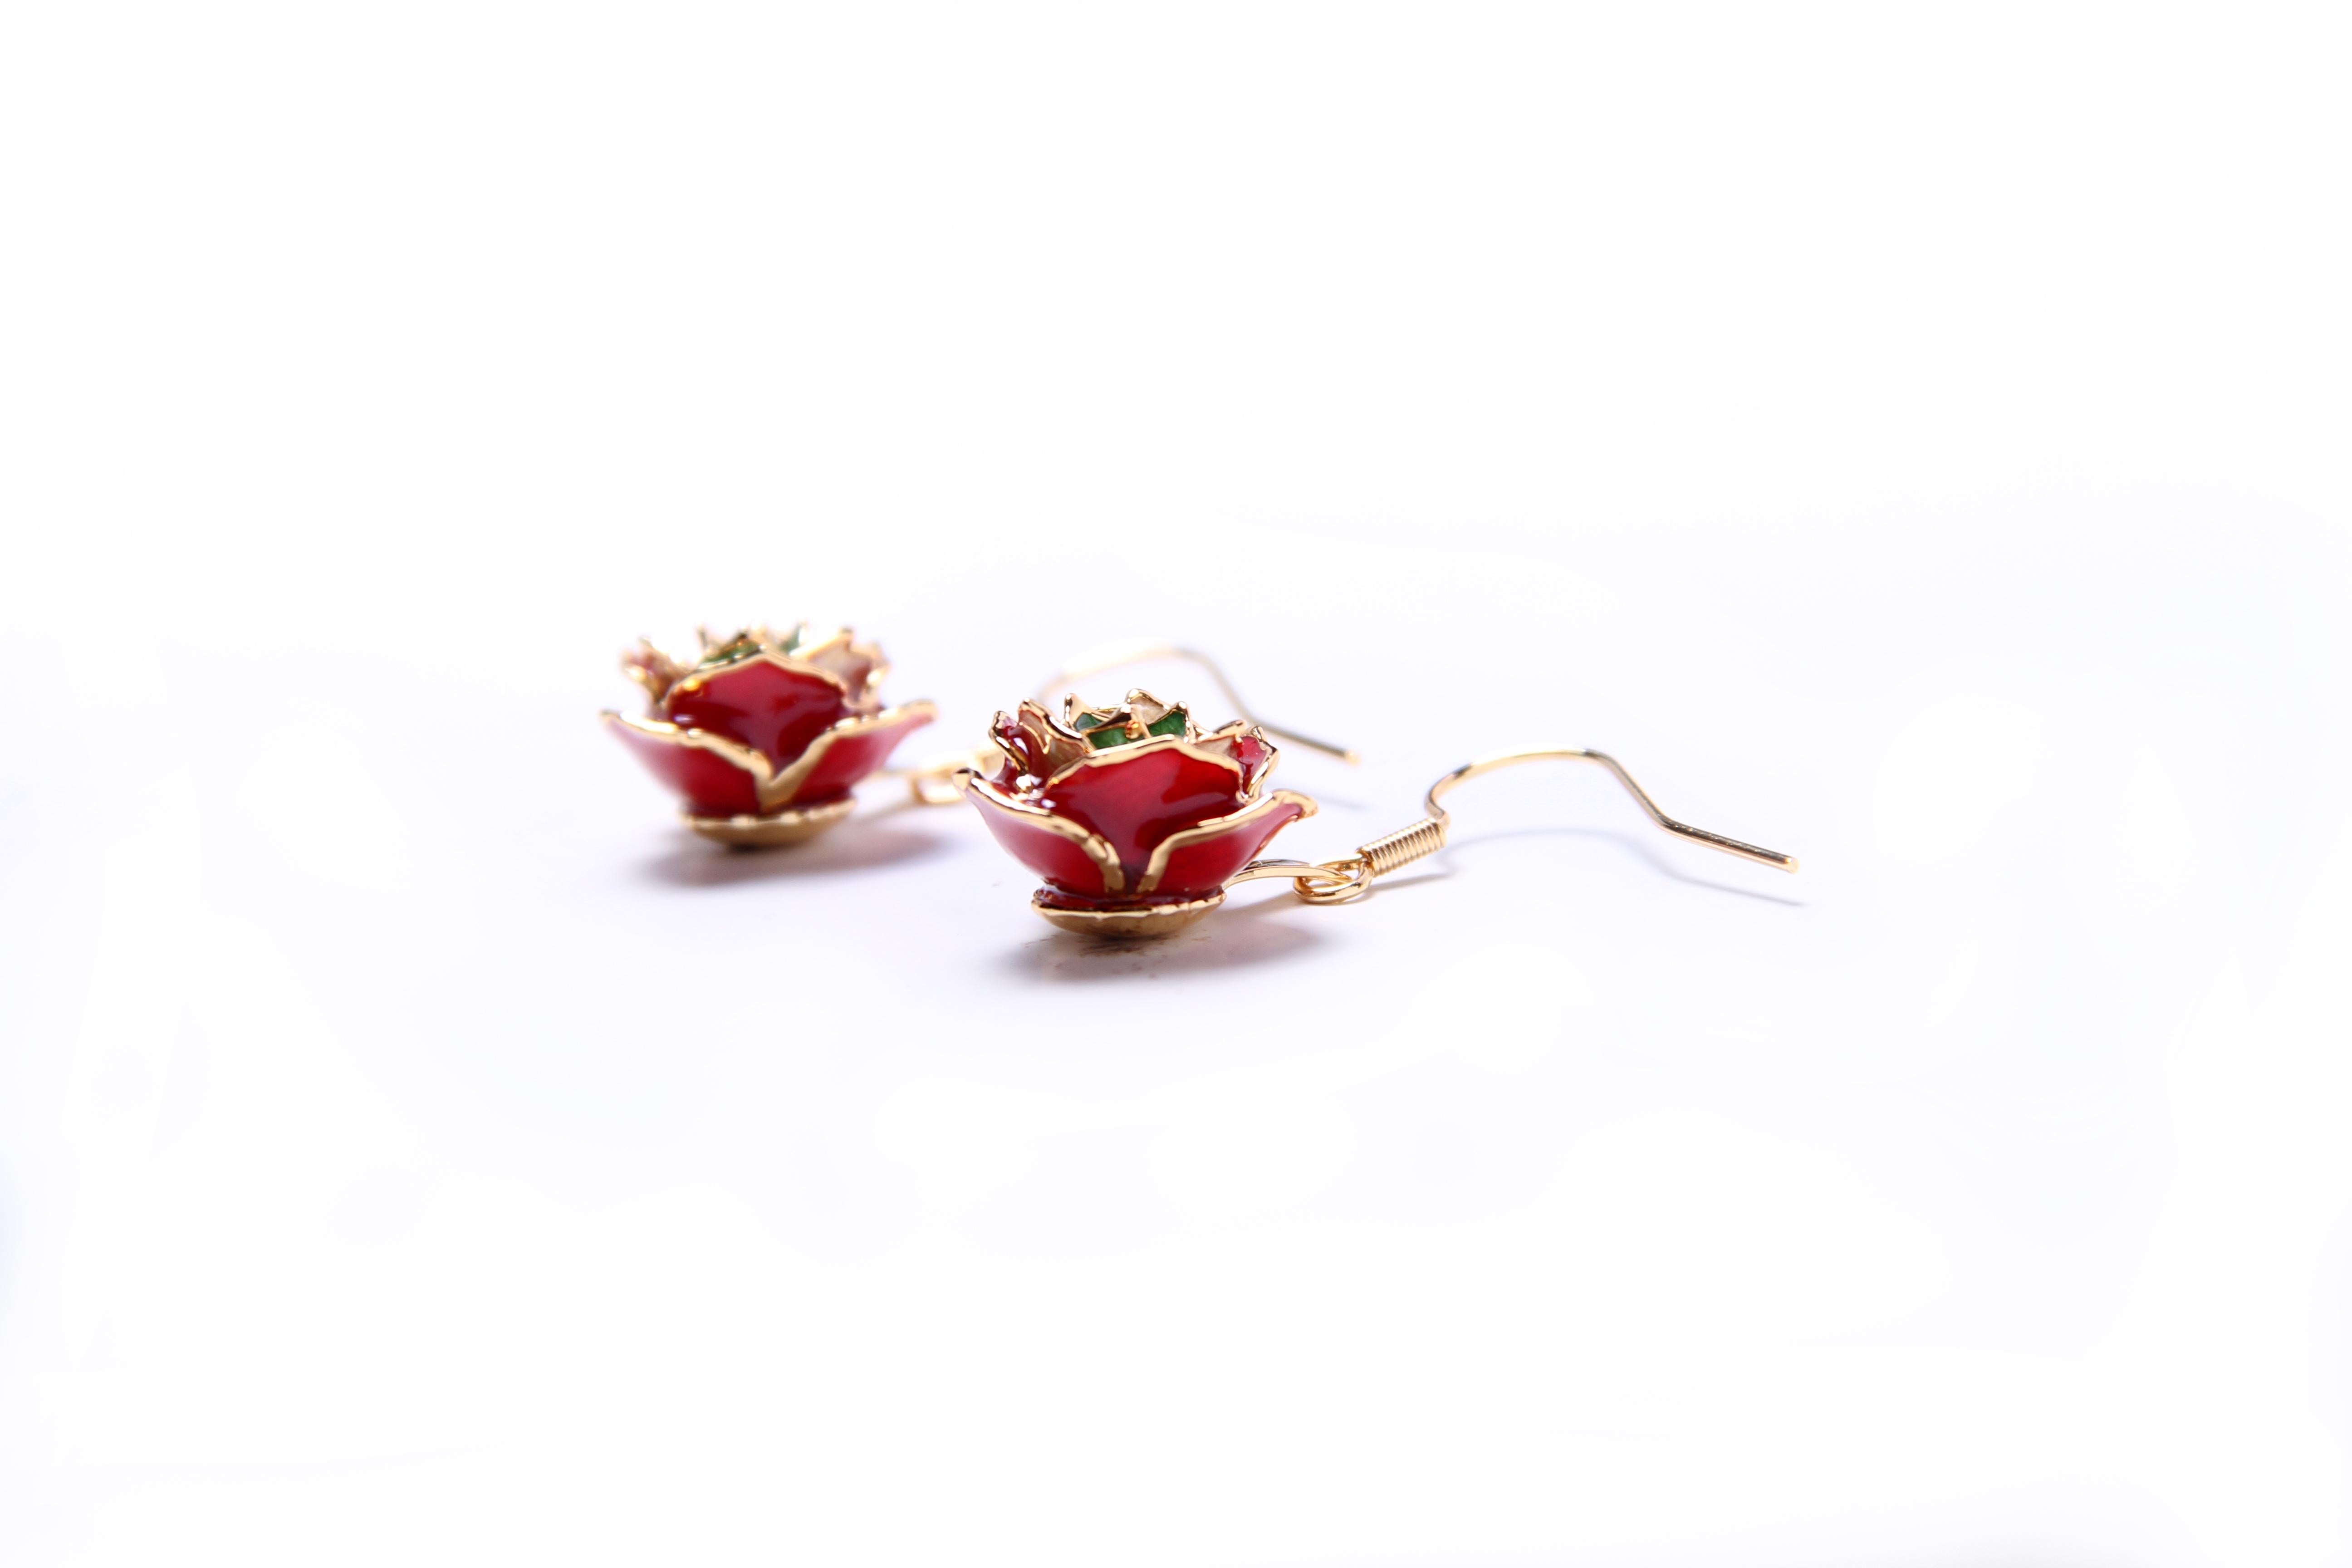 This marvelous earring will add that final touch to your outfit. Gold-trimmed petals proudly painted in the colors of the Lebanese flag represent the beauty of Lebanon that will forever continue to bloom. This gilded treasure will be a priceless and